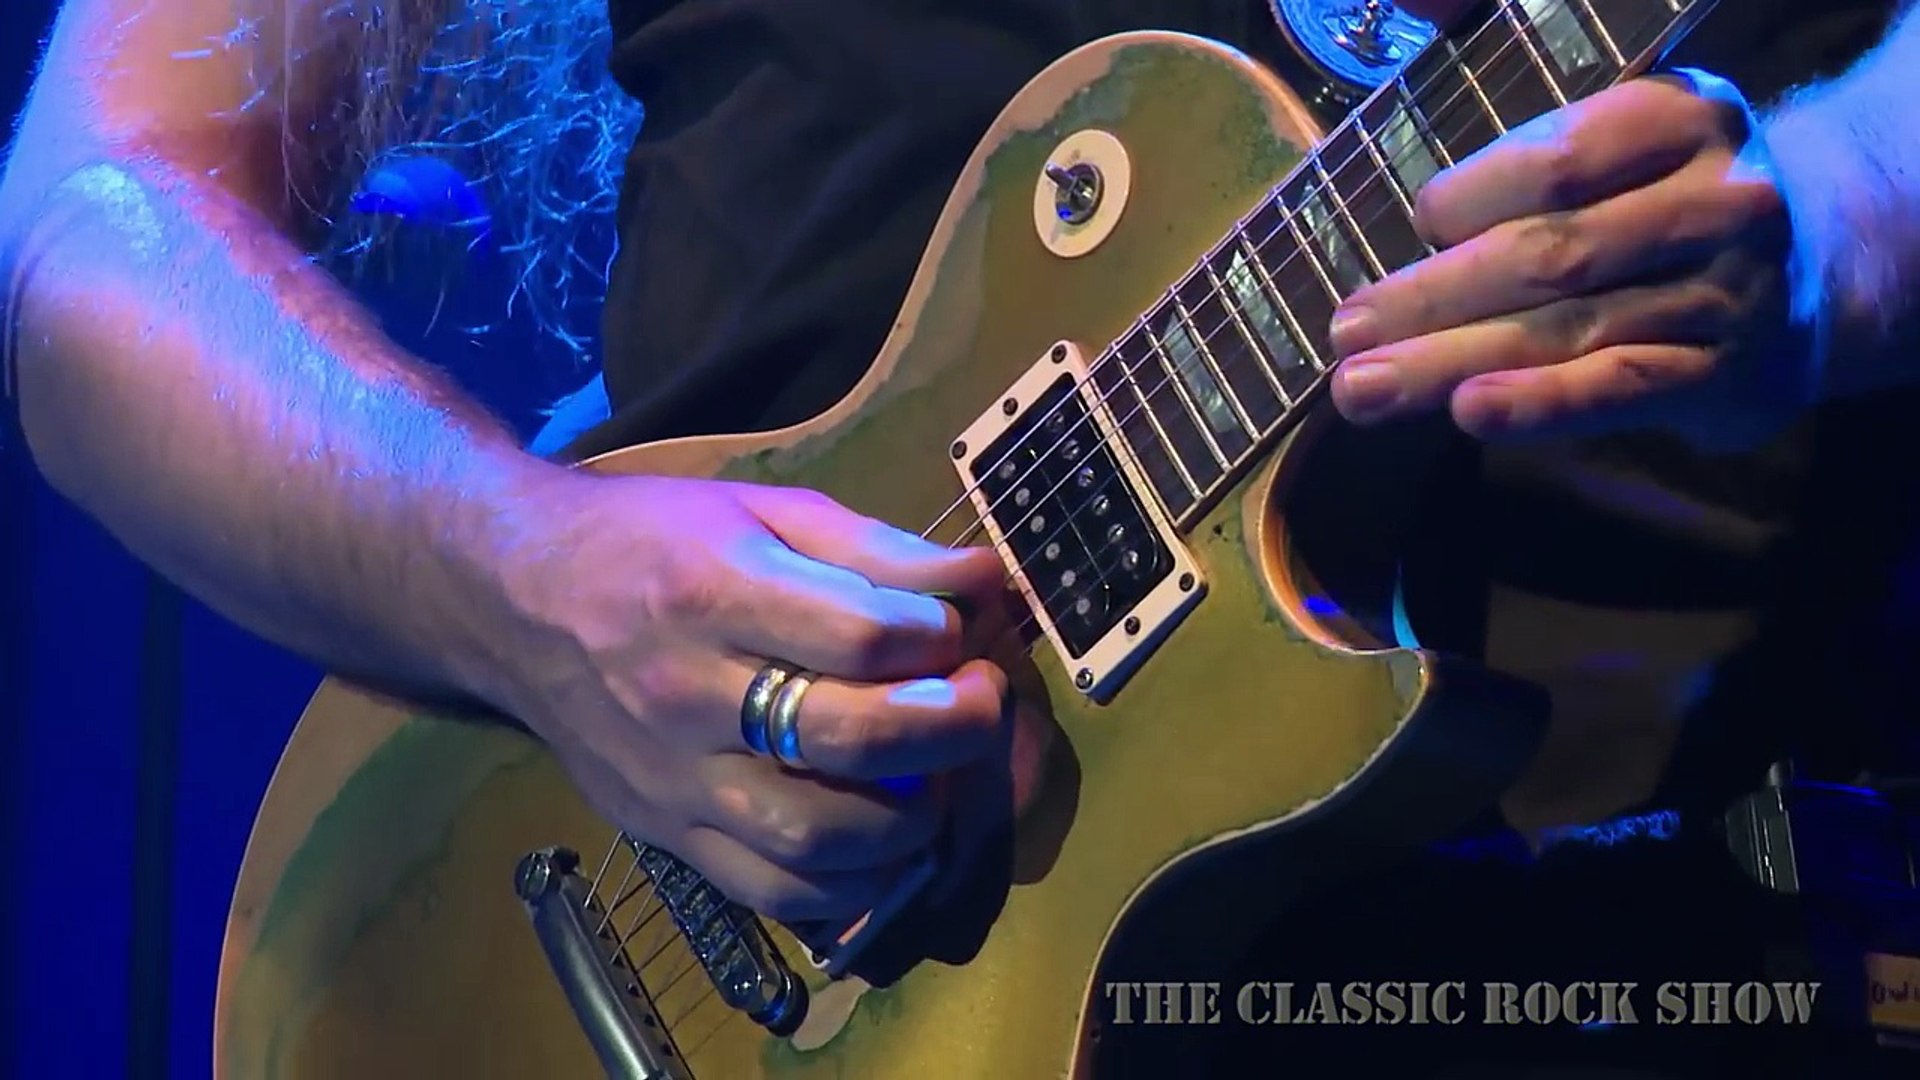 Gary Moore Still Got the Blues performed by The Classic Rock Show